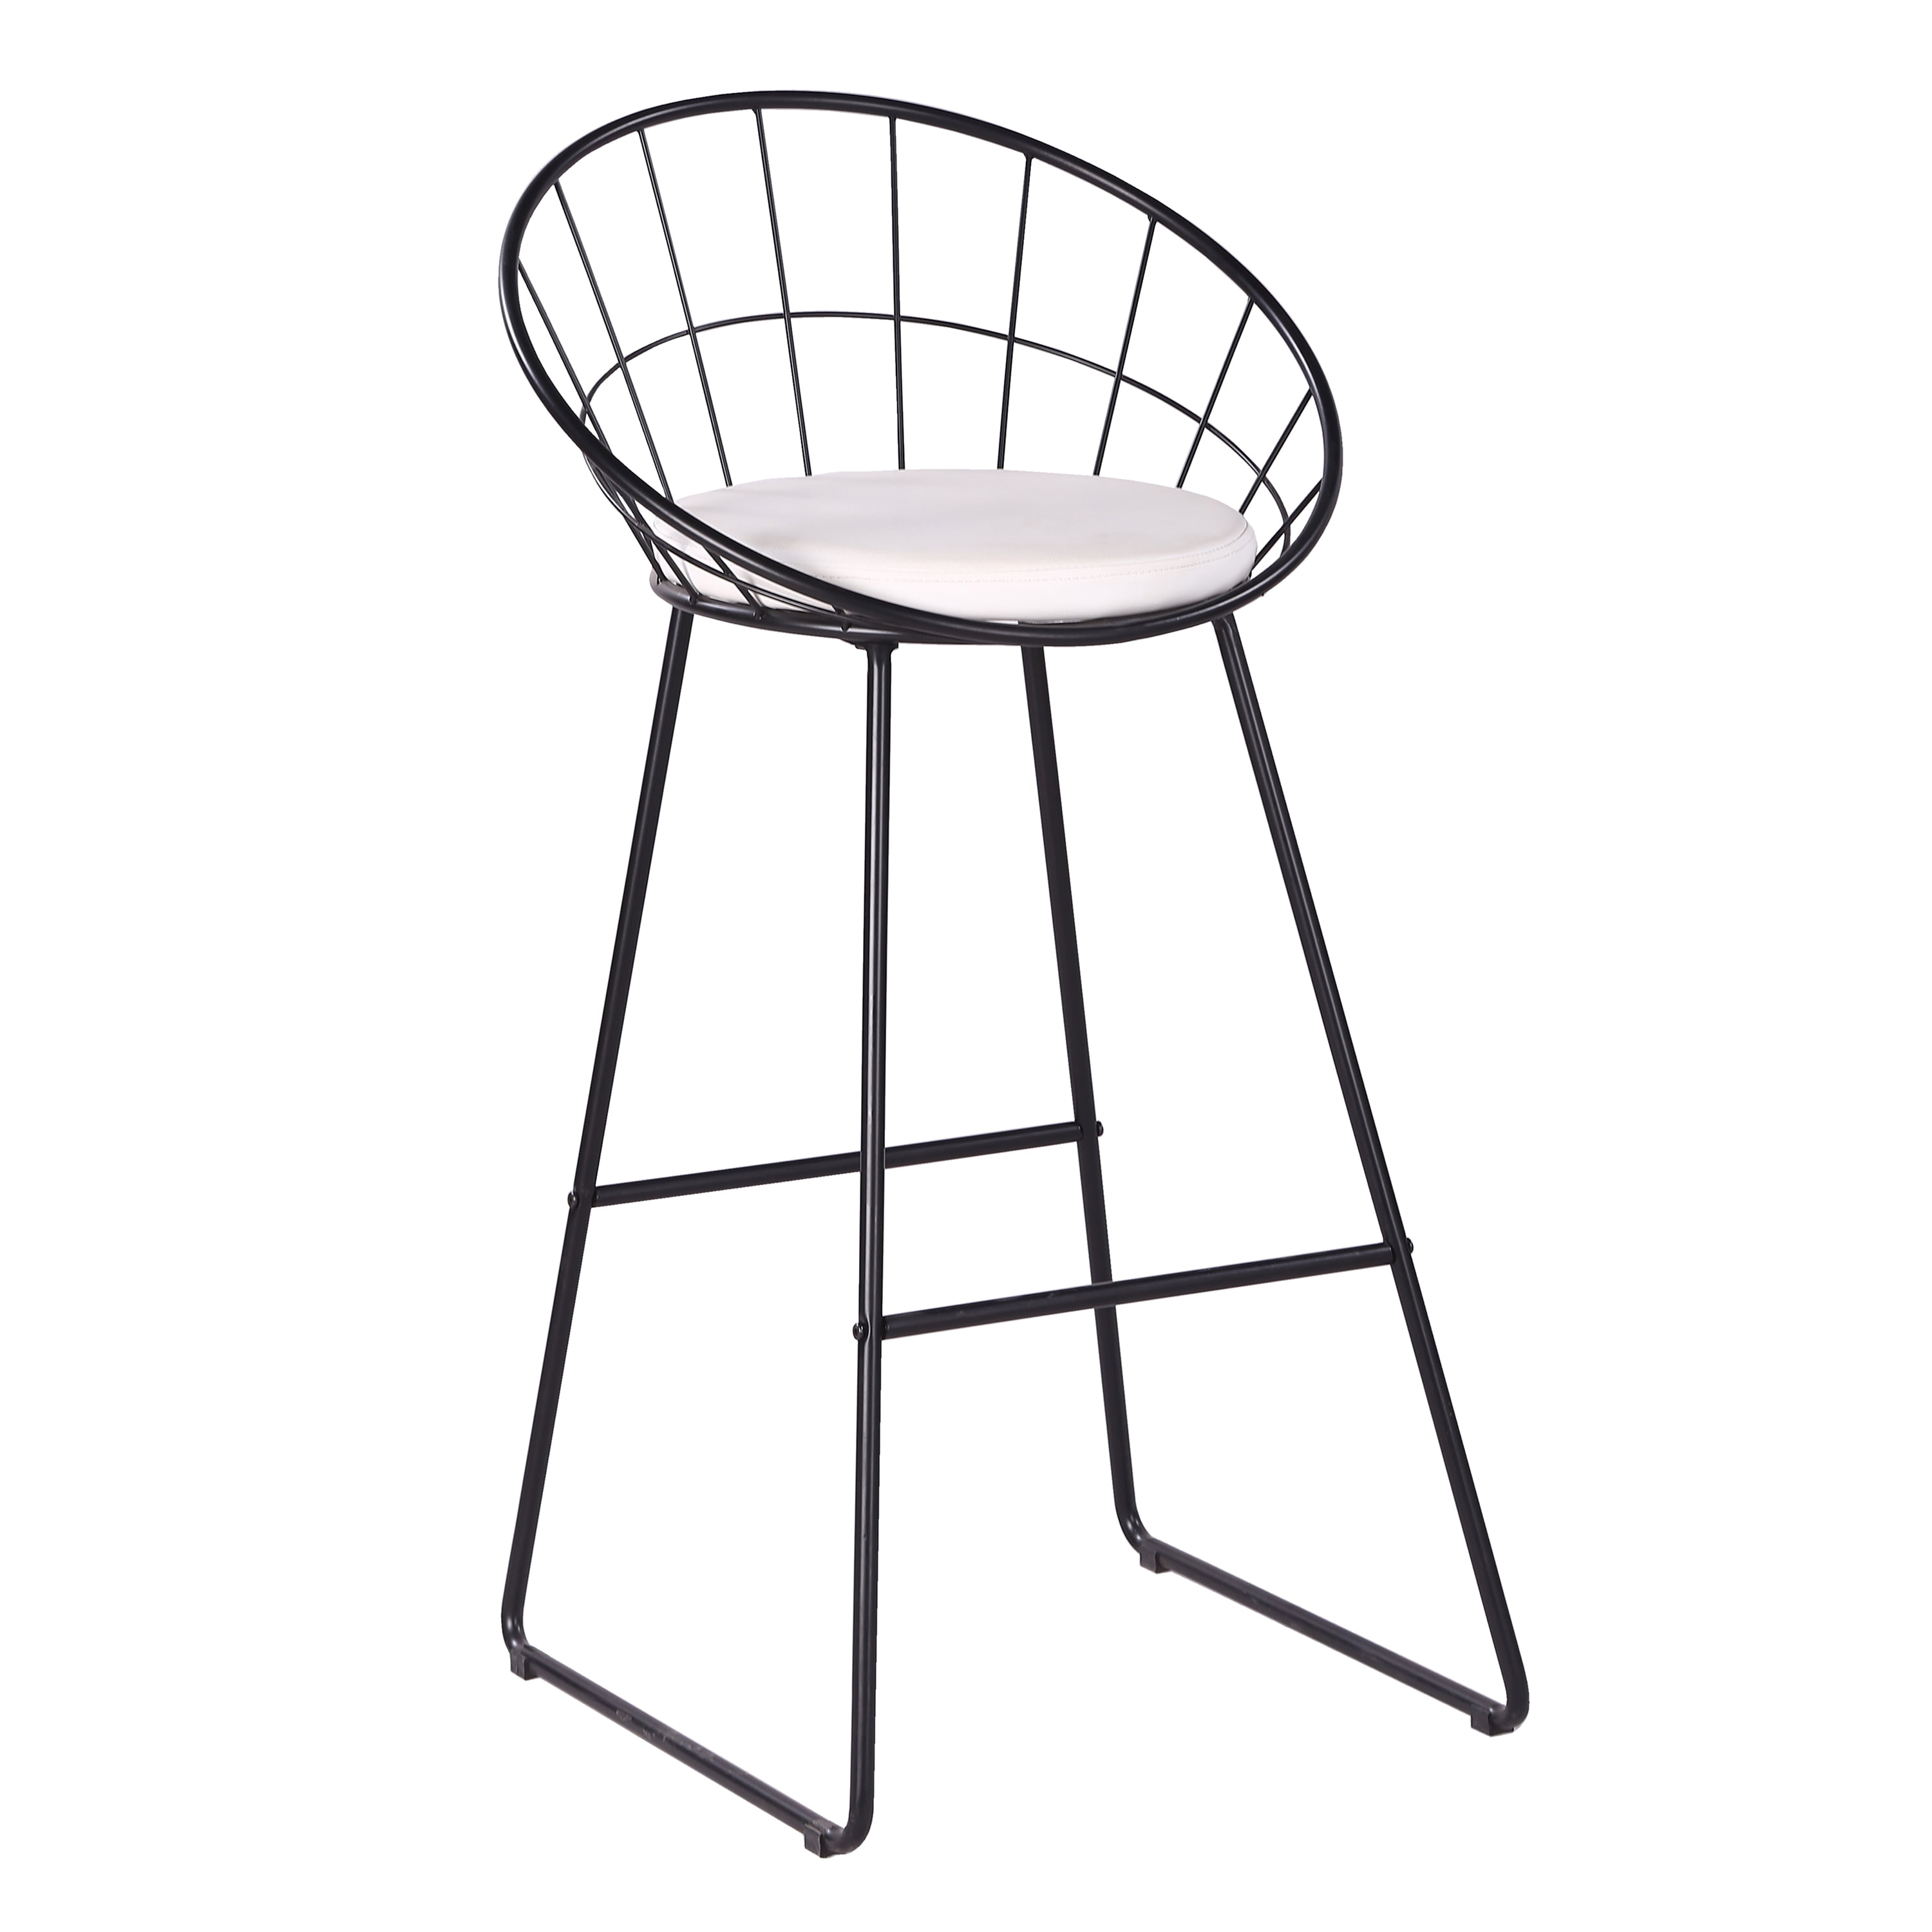 Nordic Bar Stool Chair Wrought Iron, Wrought Iron Bar Stools With Backs